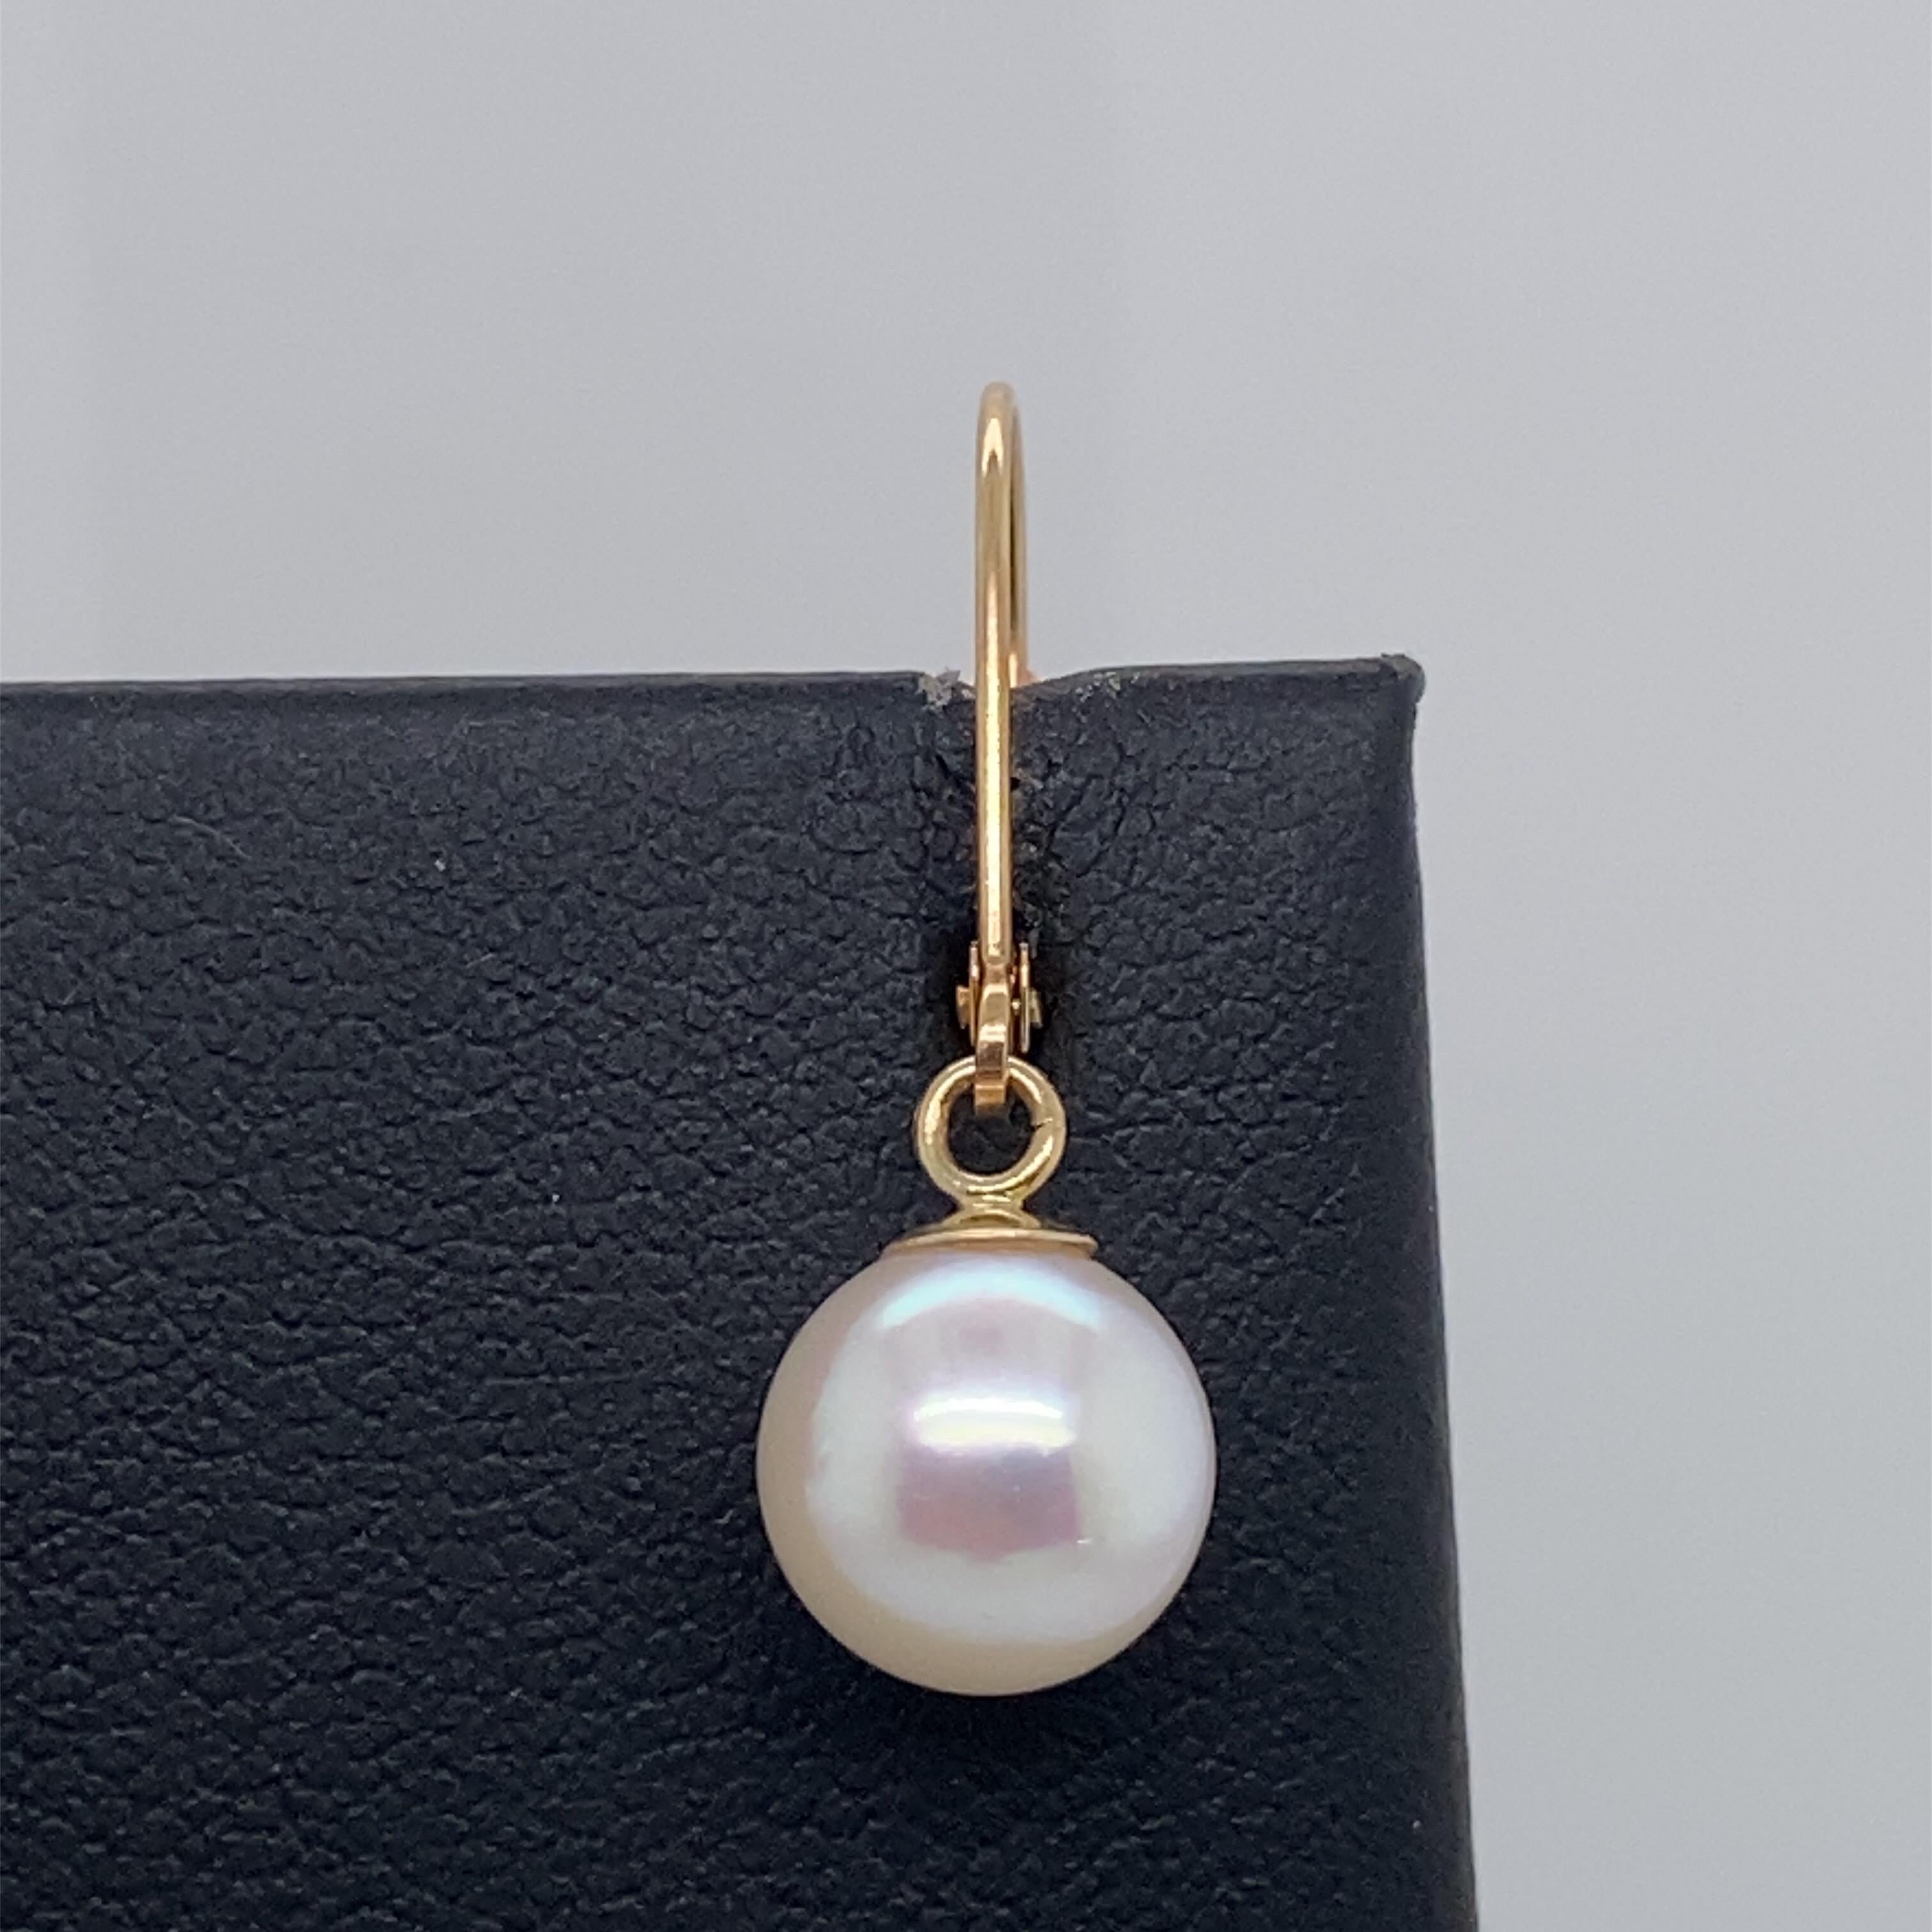 A cute pair of white Freshwater pearls measuring 8.5-9 mm crafted in 14k yellow gold.
Also available in white gold 